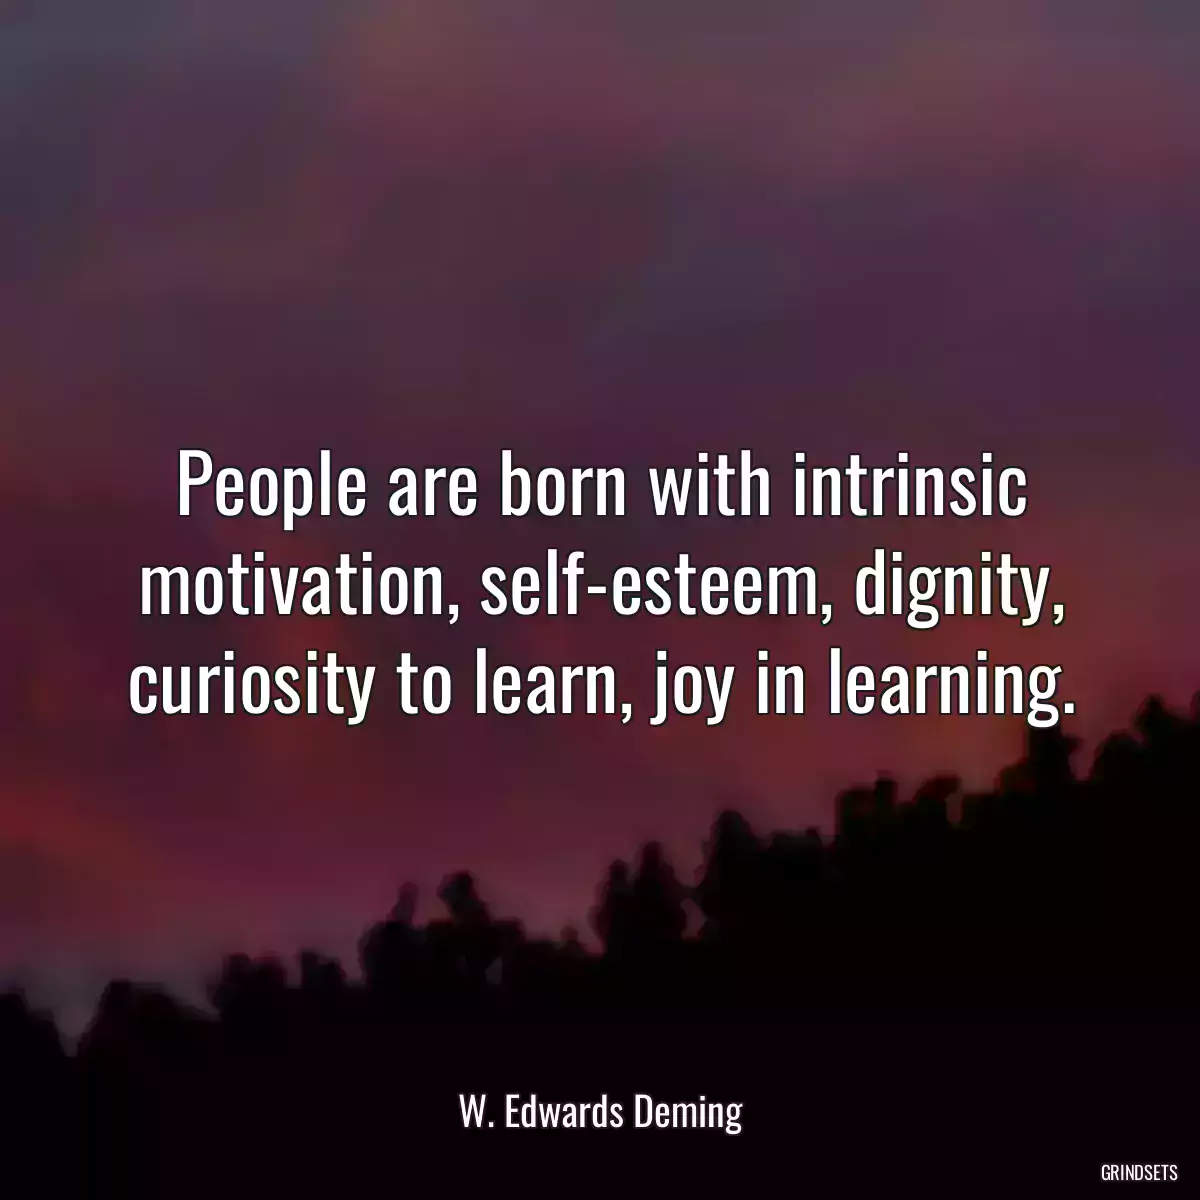 People are born with intrinsic motivation, self-esteem, dignity, curiosity to learn, joy in learning.